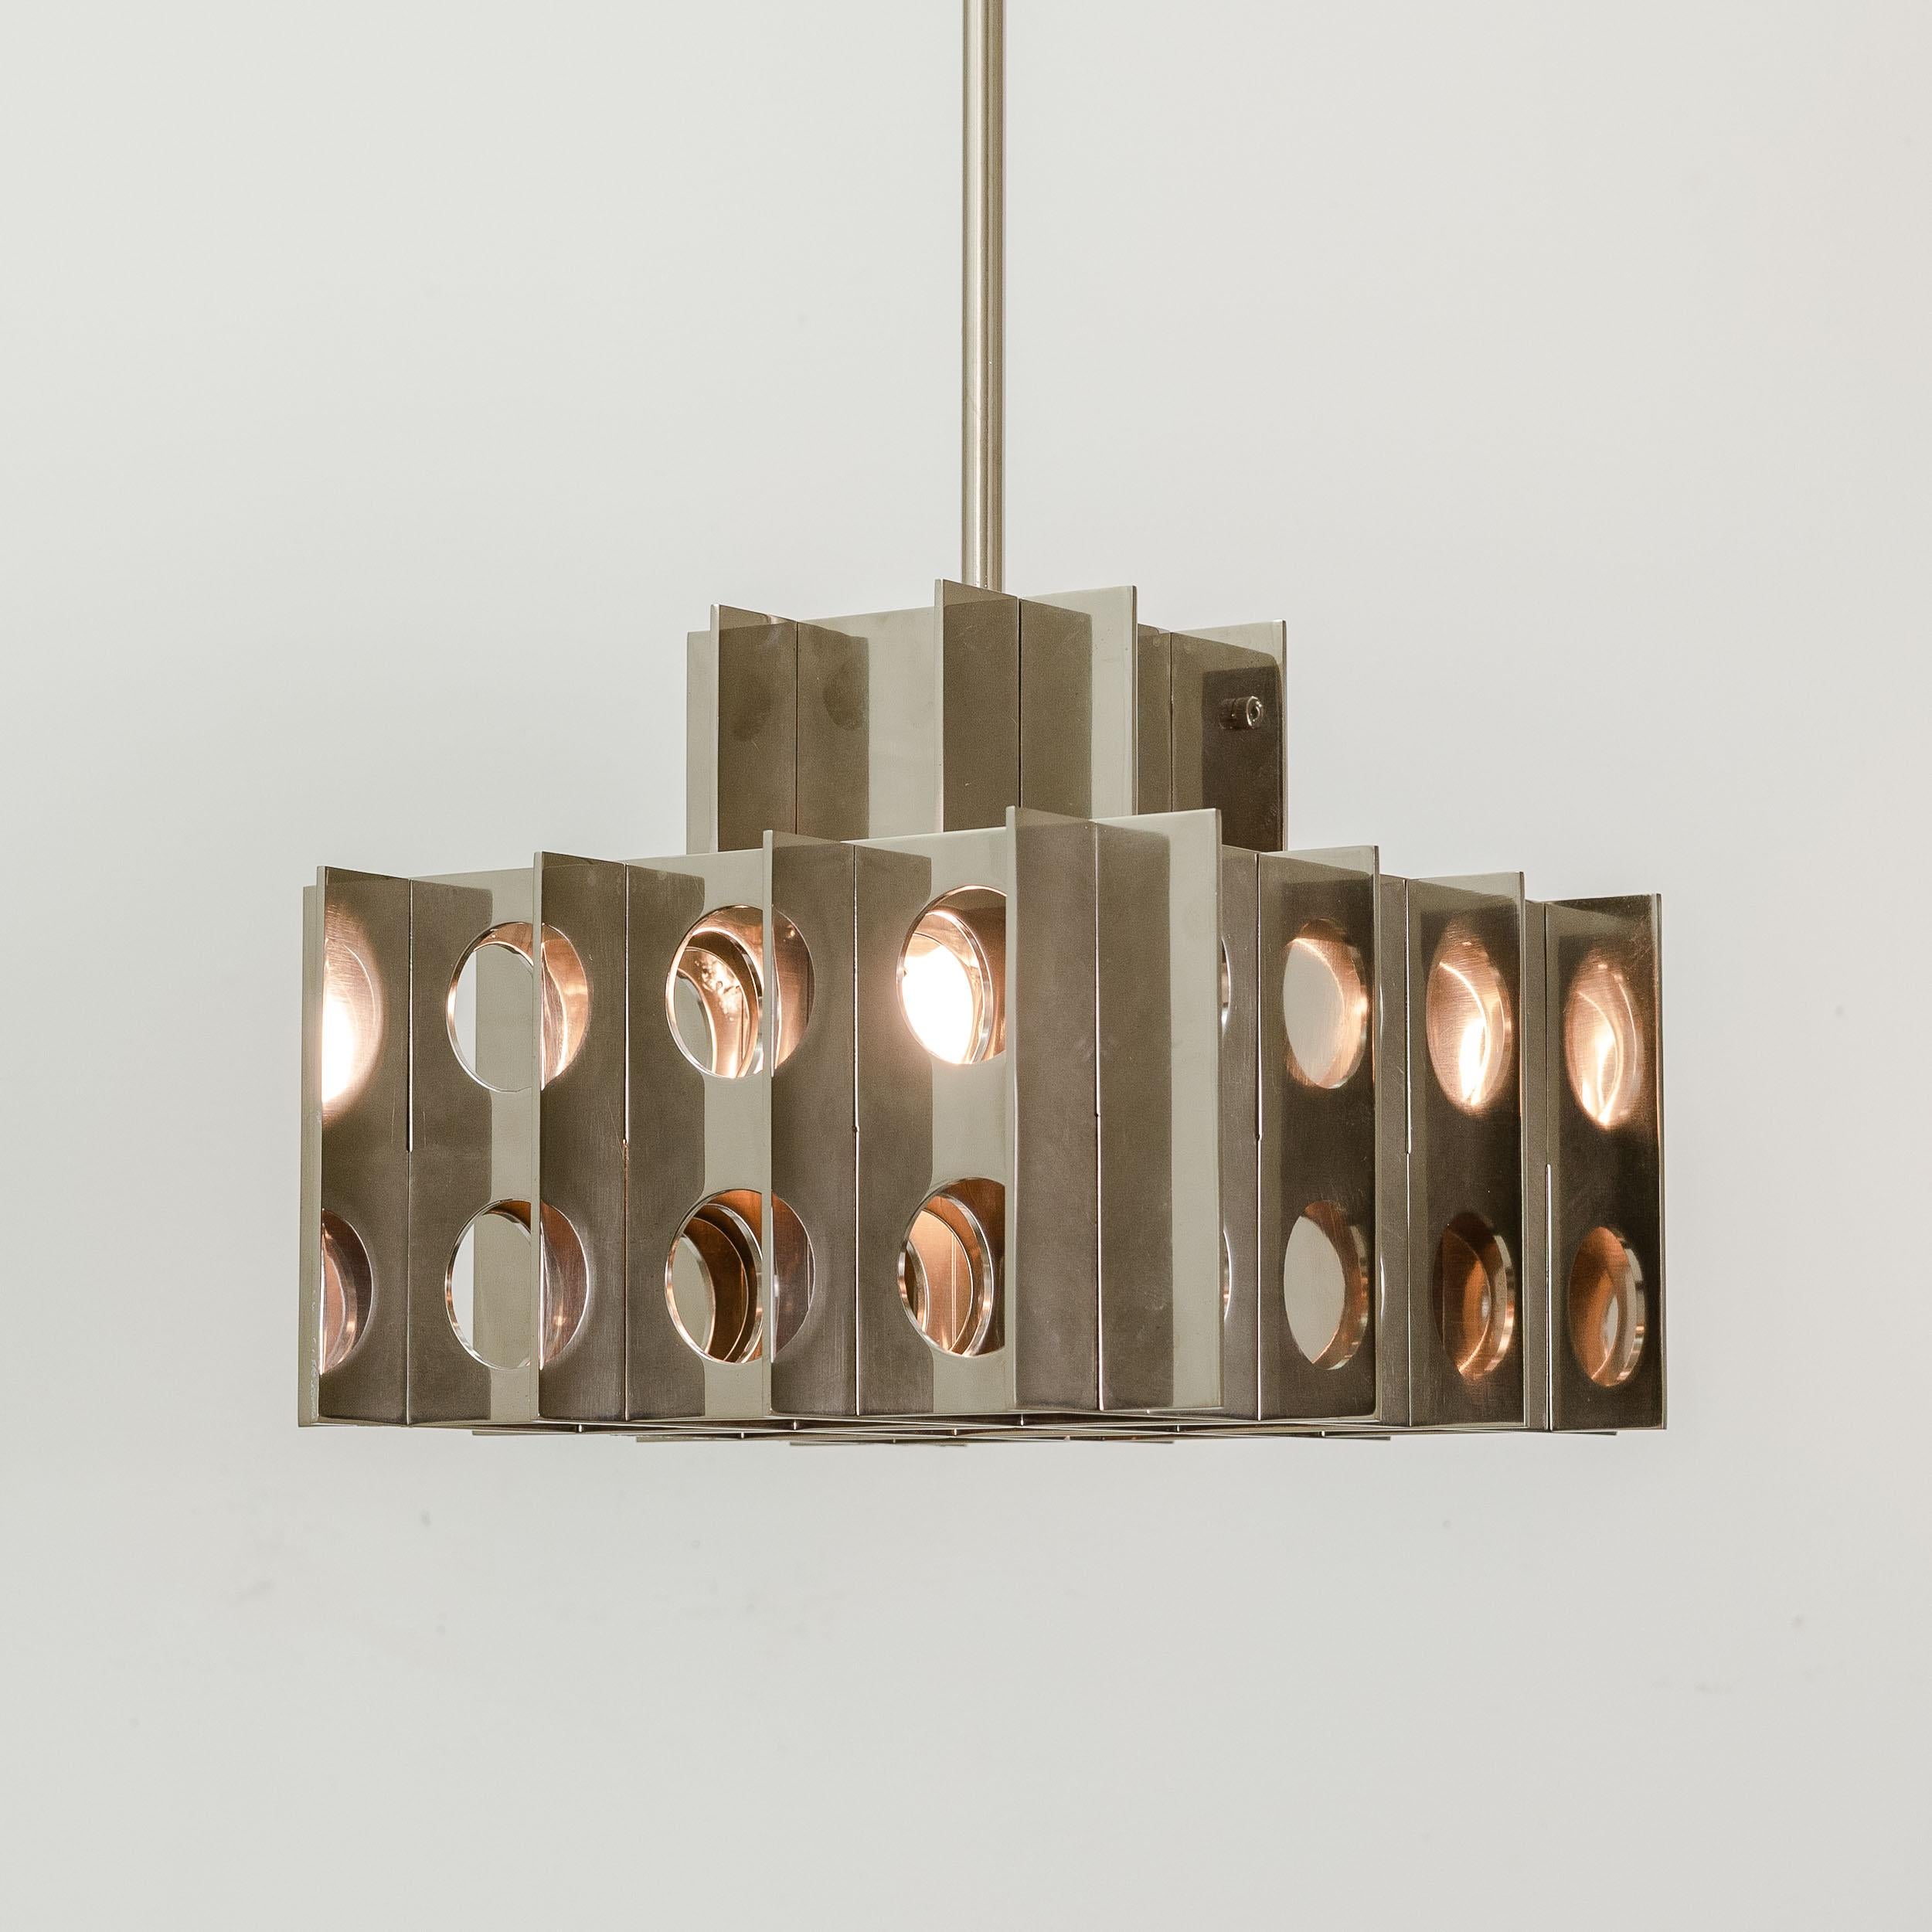 Tenfold Pendant 3TA 12inch in Polished Nickel by Luft Tanaka Studio

Composed of interlocking mirror polished sheetmetal panels, the Tenfold Series is inspired by the aesthetics, architectural styles, and art movements of the 1970s. The light